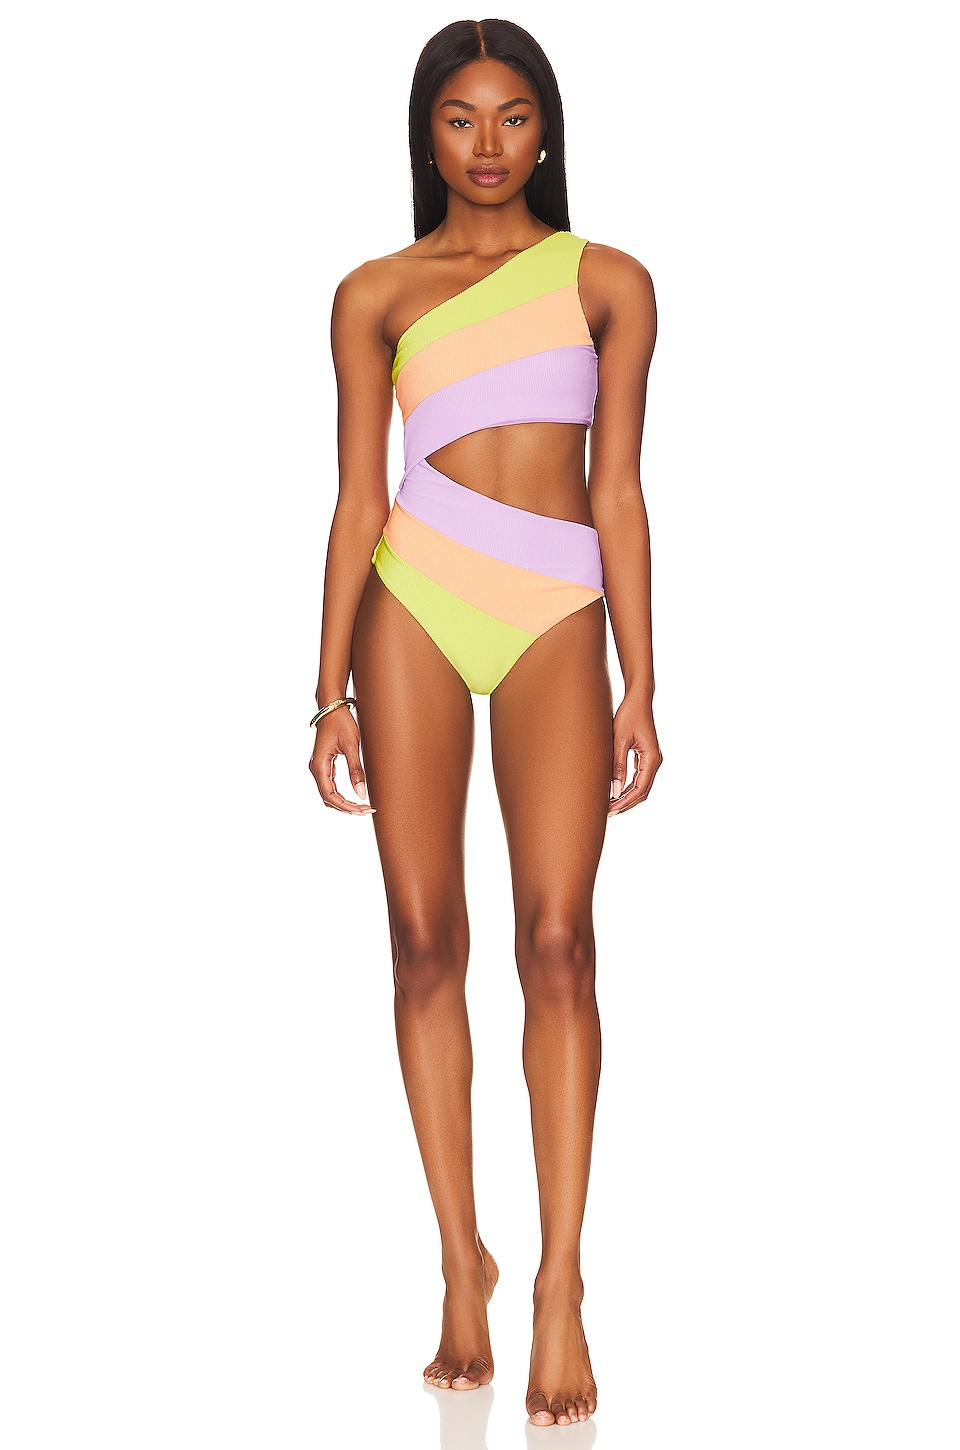 Women's Beach Riot Clothing, Shoes & Accessories